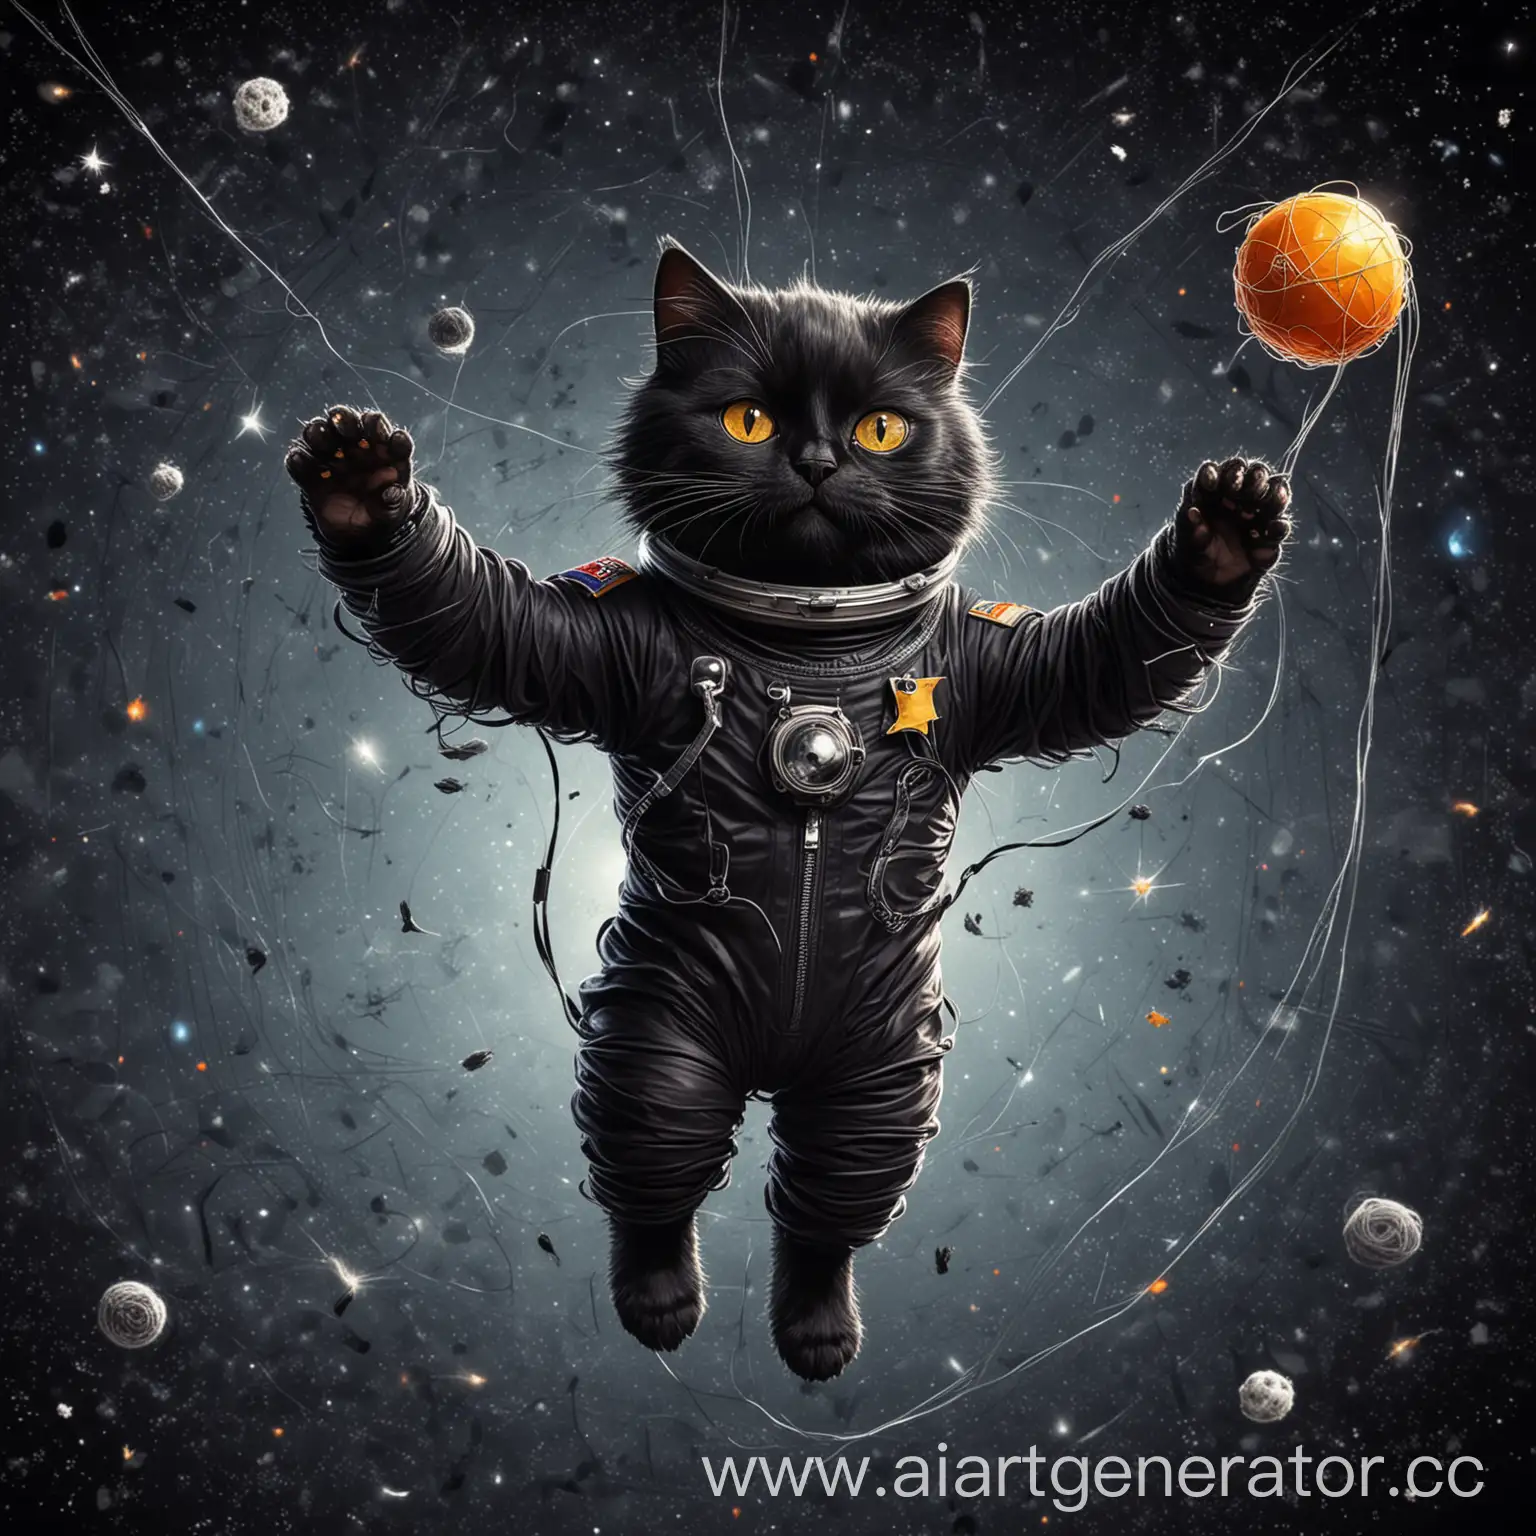 Cartoon-Black-Cat-Floating-in-Weightlessness-in-Spacesuit-Chasing-Thread-Ball